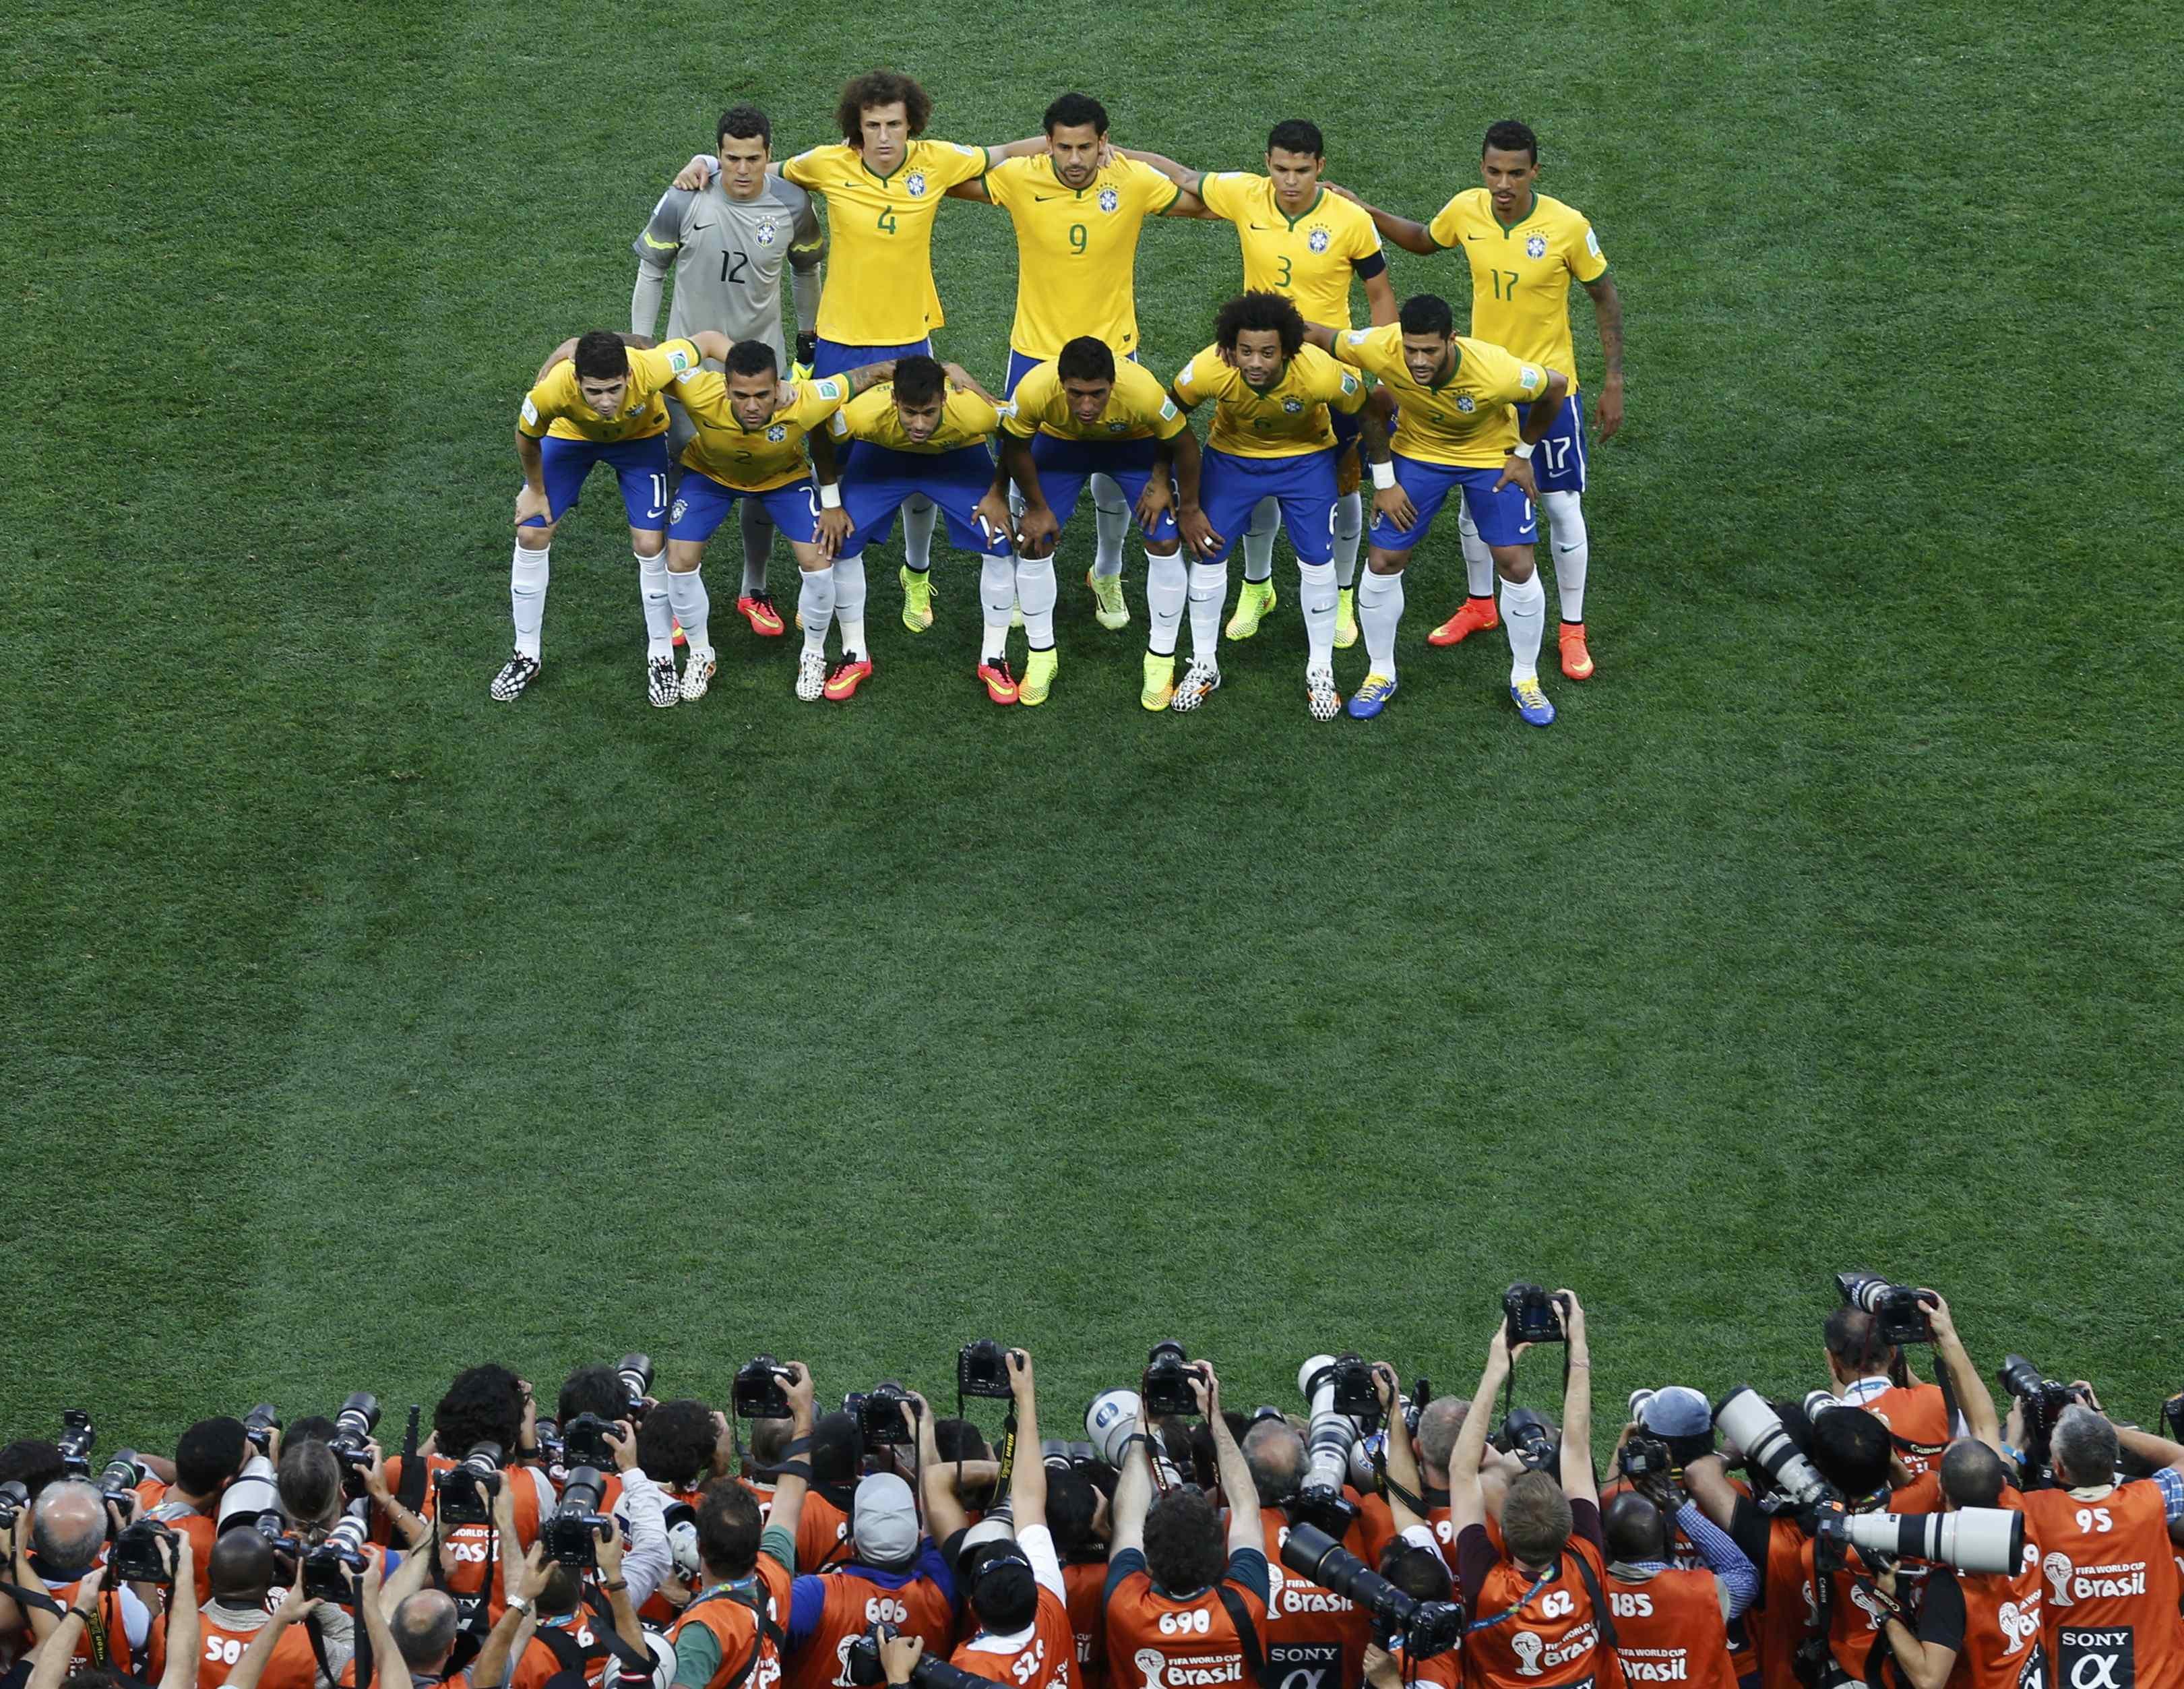 Brazil's national soccer players pose for a team photo before their 2014 World Cup opening match against Croatia at the Corinthians arena in Sao Paulo